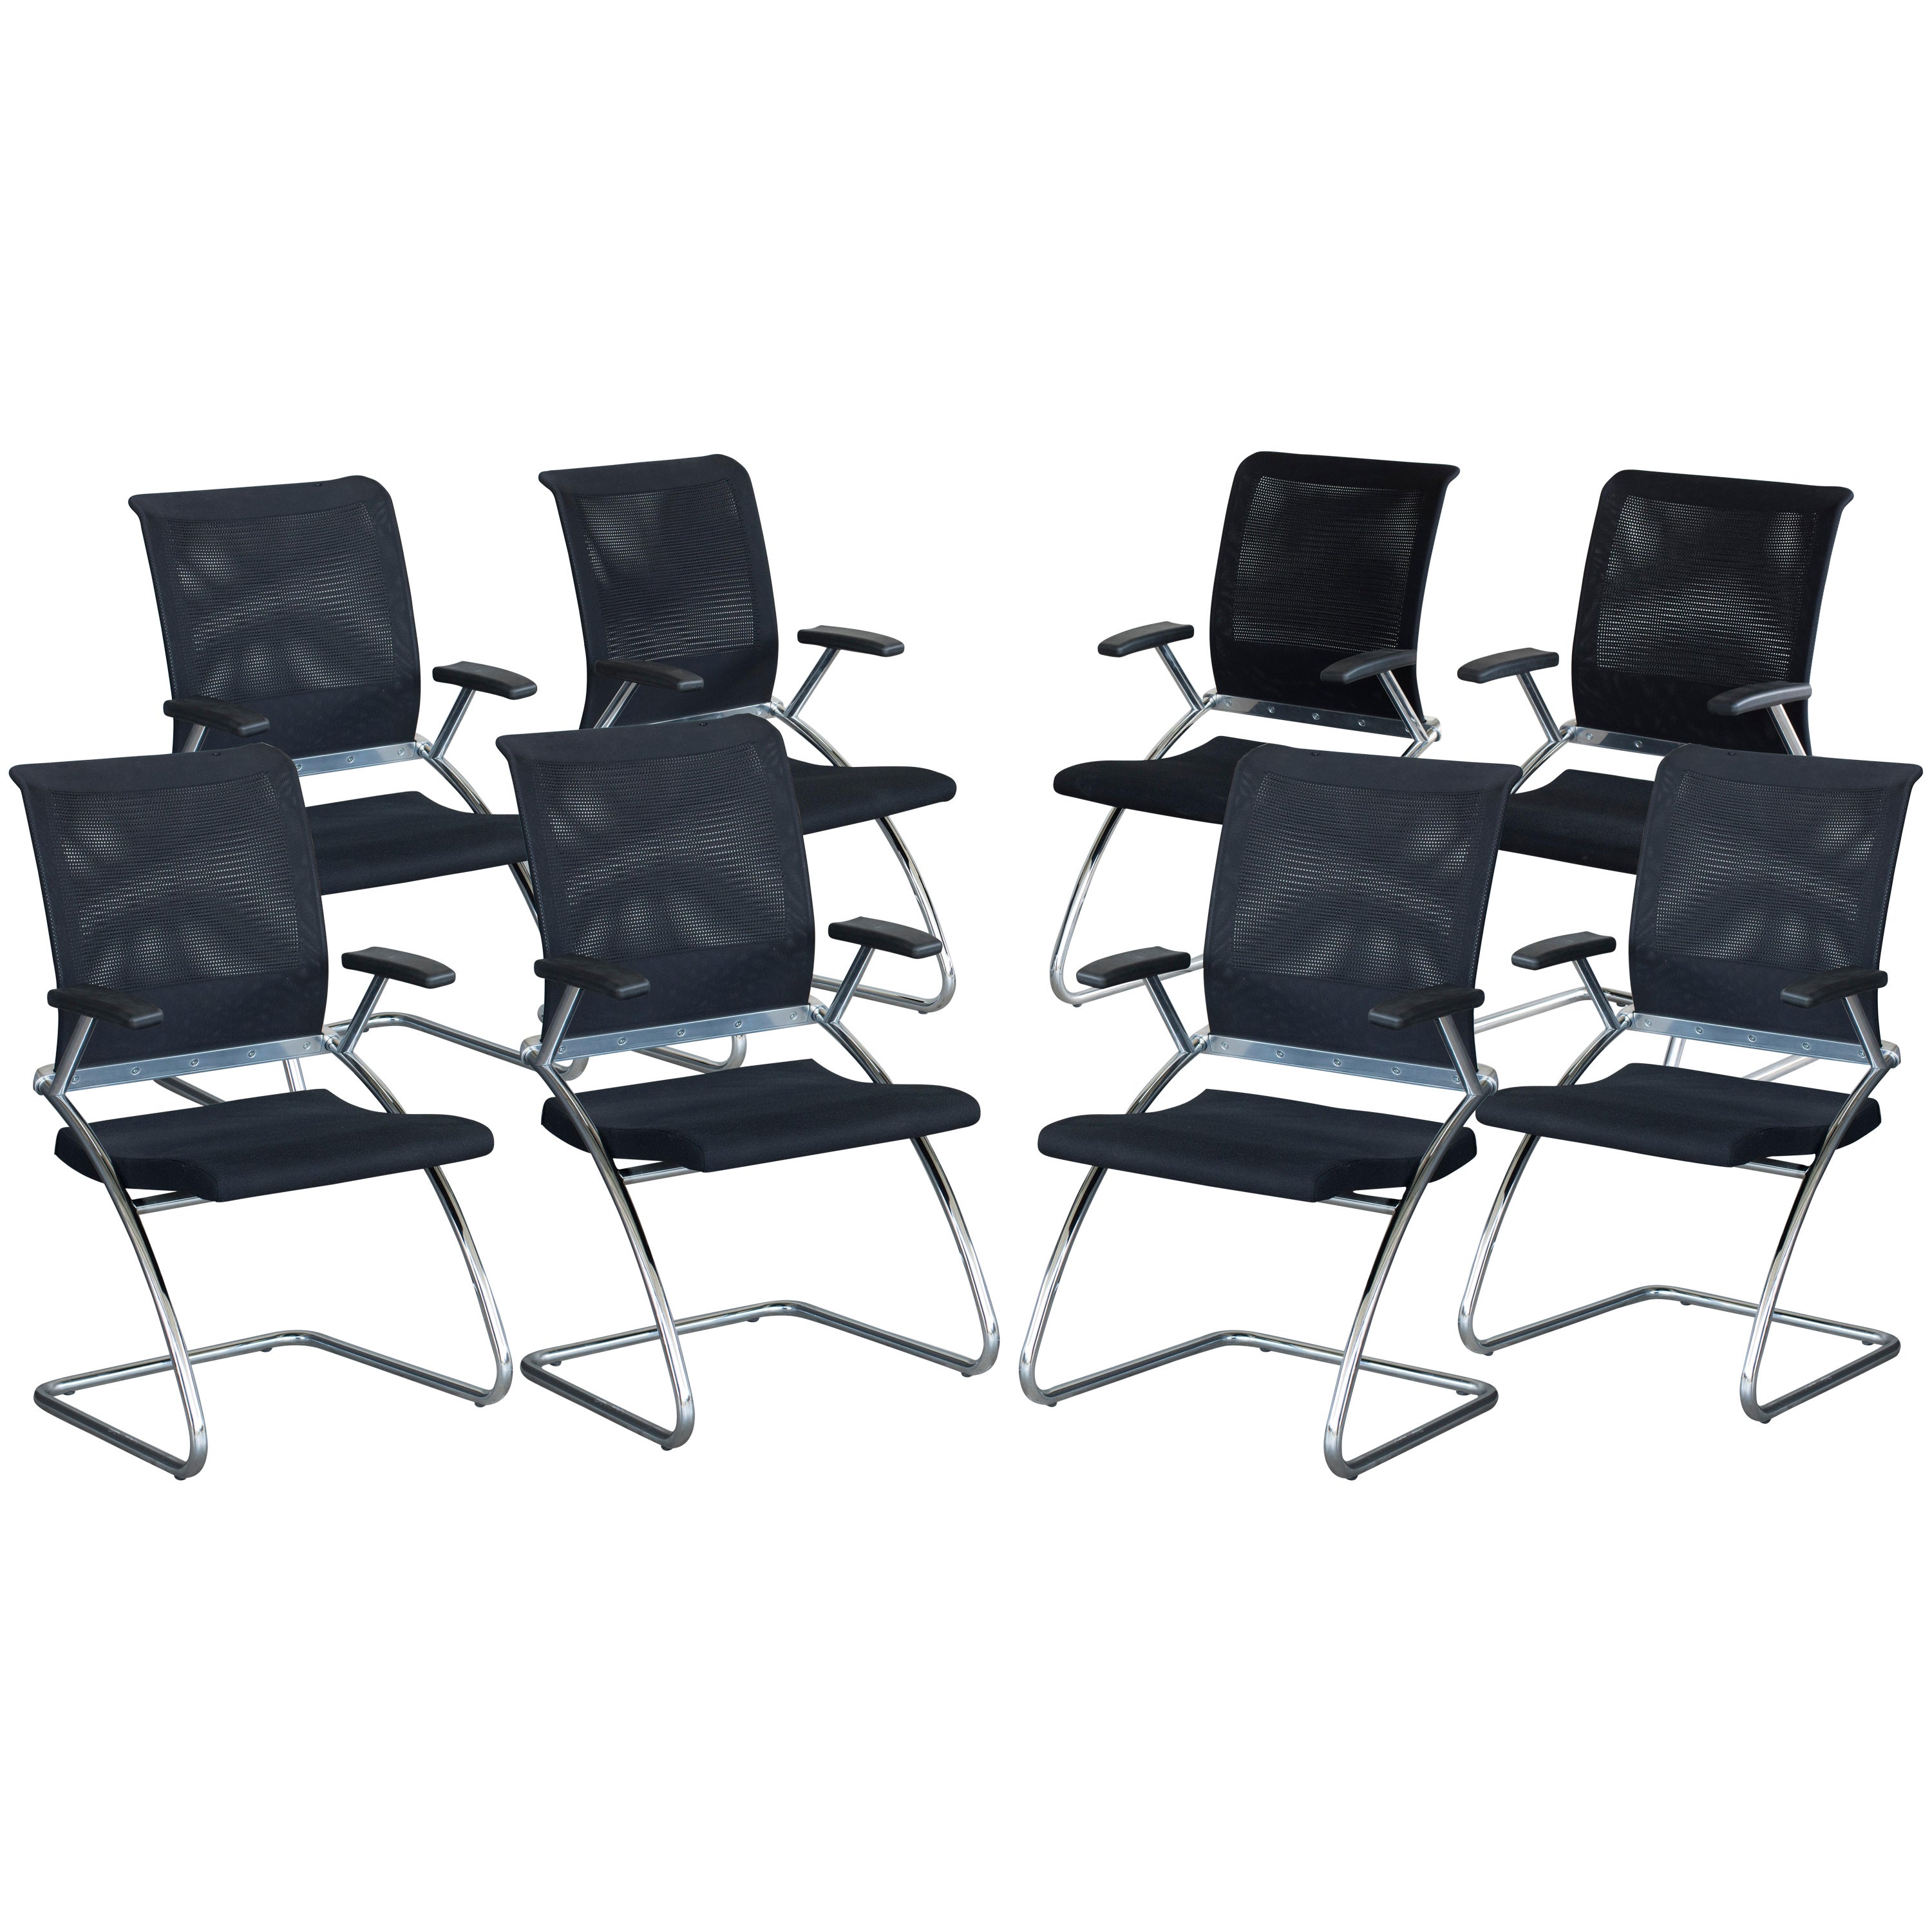 1980s Office Technical Black Upholstery Chromed Steel Armchairs Eight Available For Sale